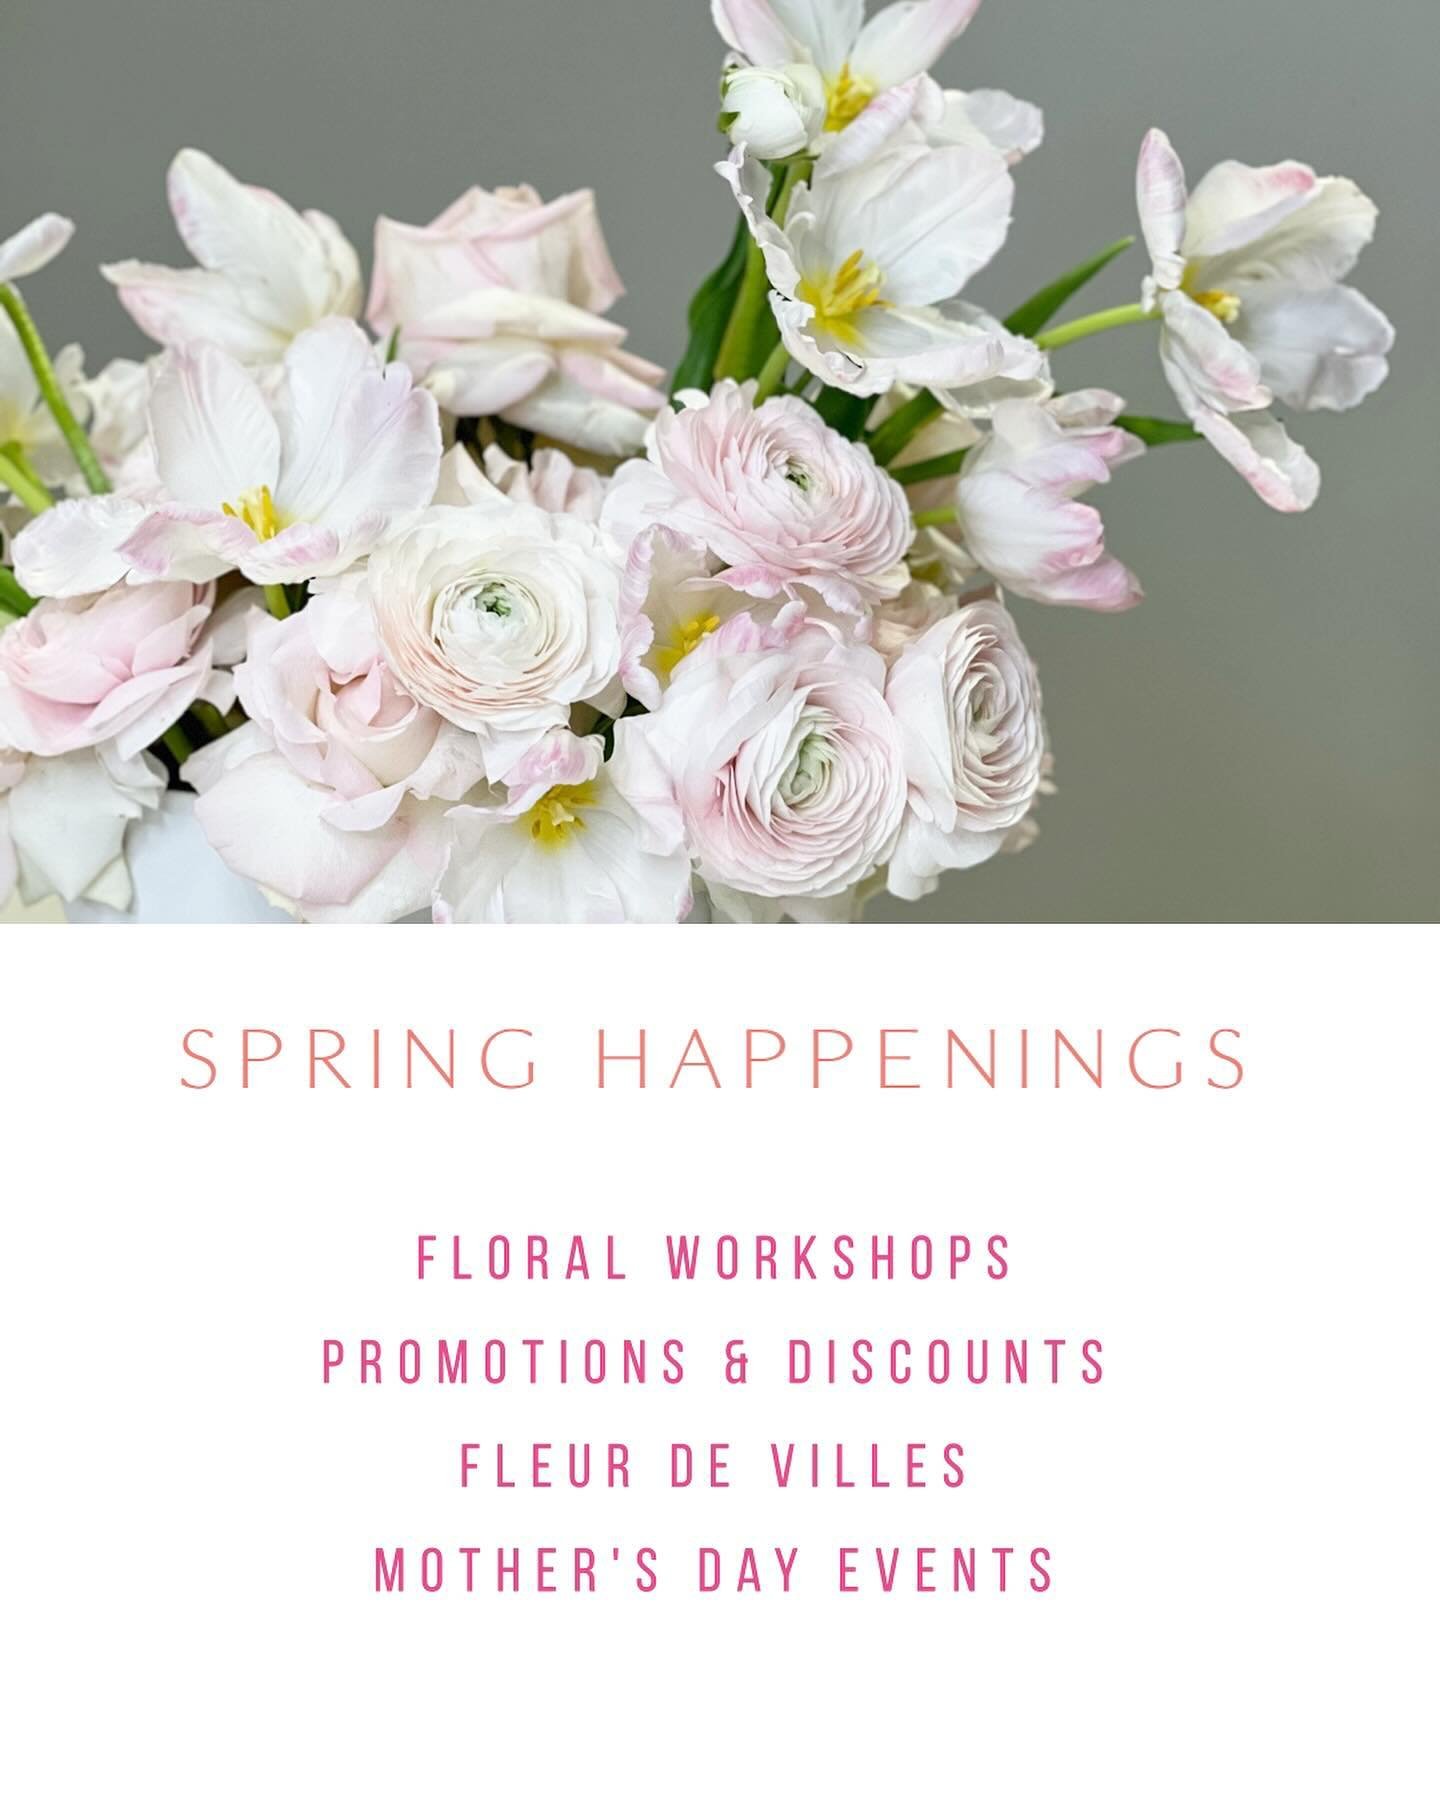 DESIGN EXPERIENCES
Discover the joy of floral design with our Design Experiences! 🌸 Available for kids and adults, our workshops offer a hands-on journey into the world of flowers. Learn how to build beautiful bouquets, stunning arches, and breathta